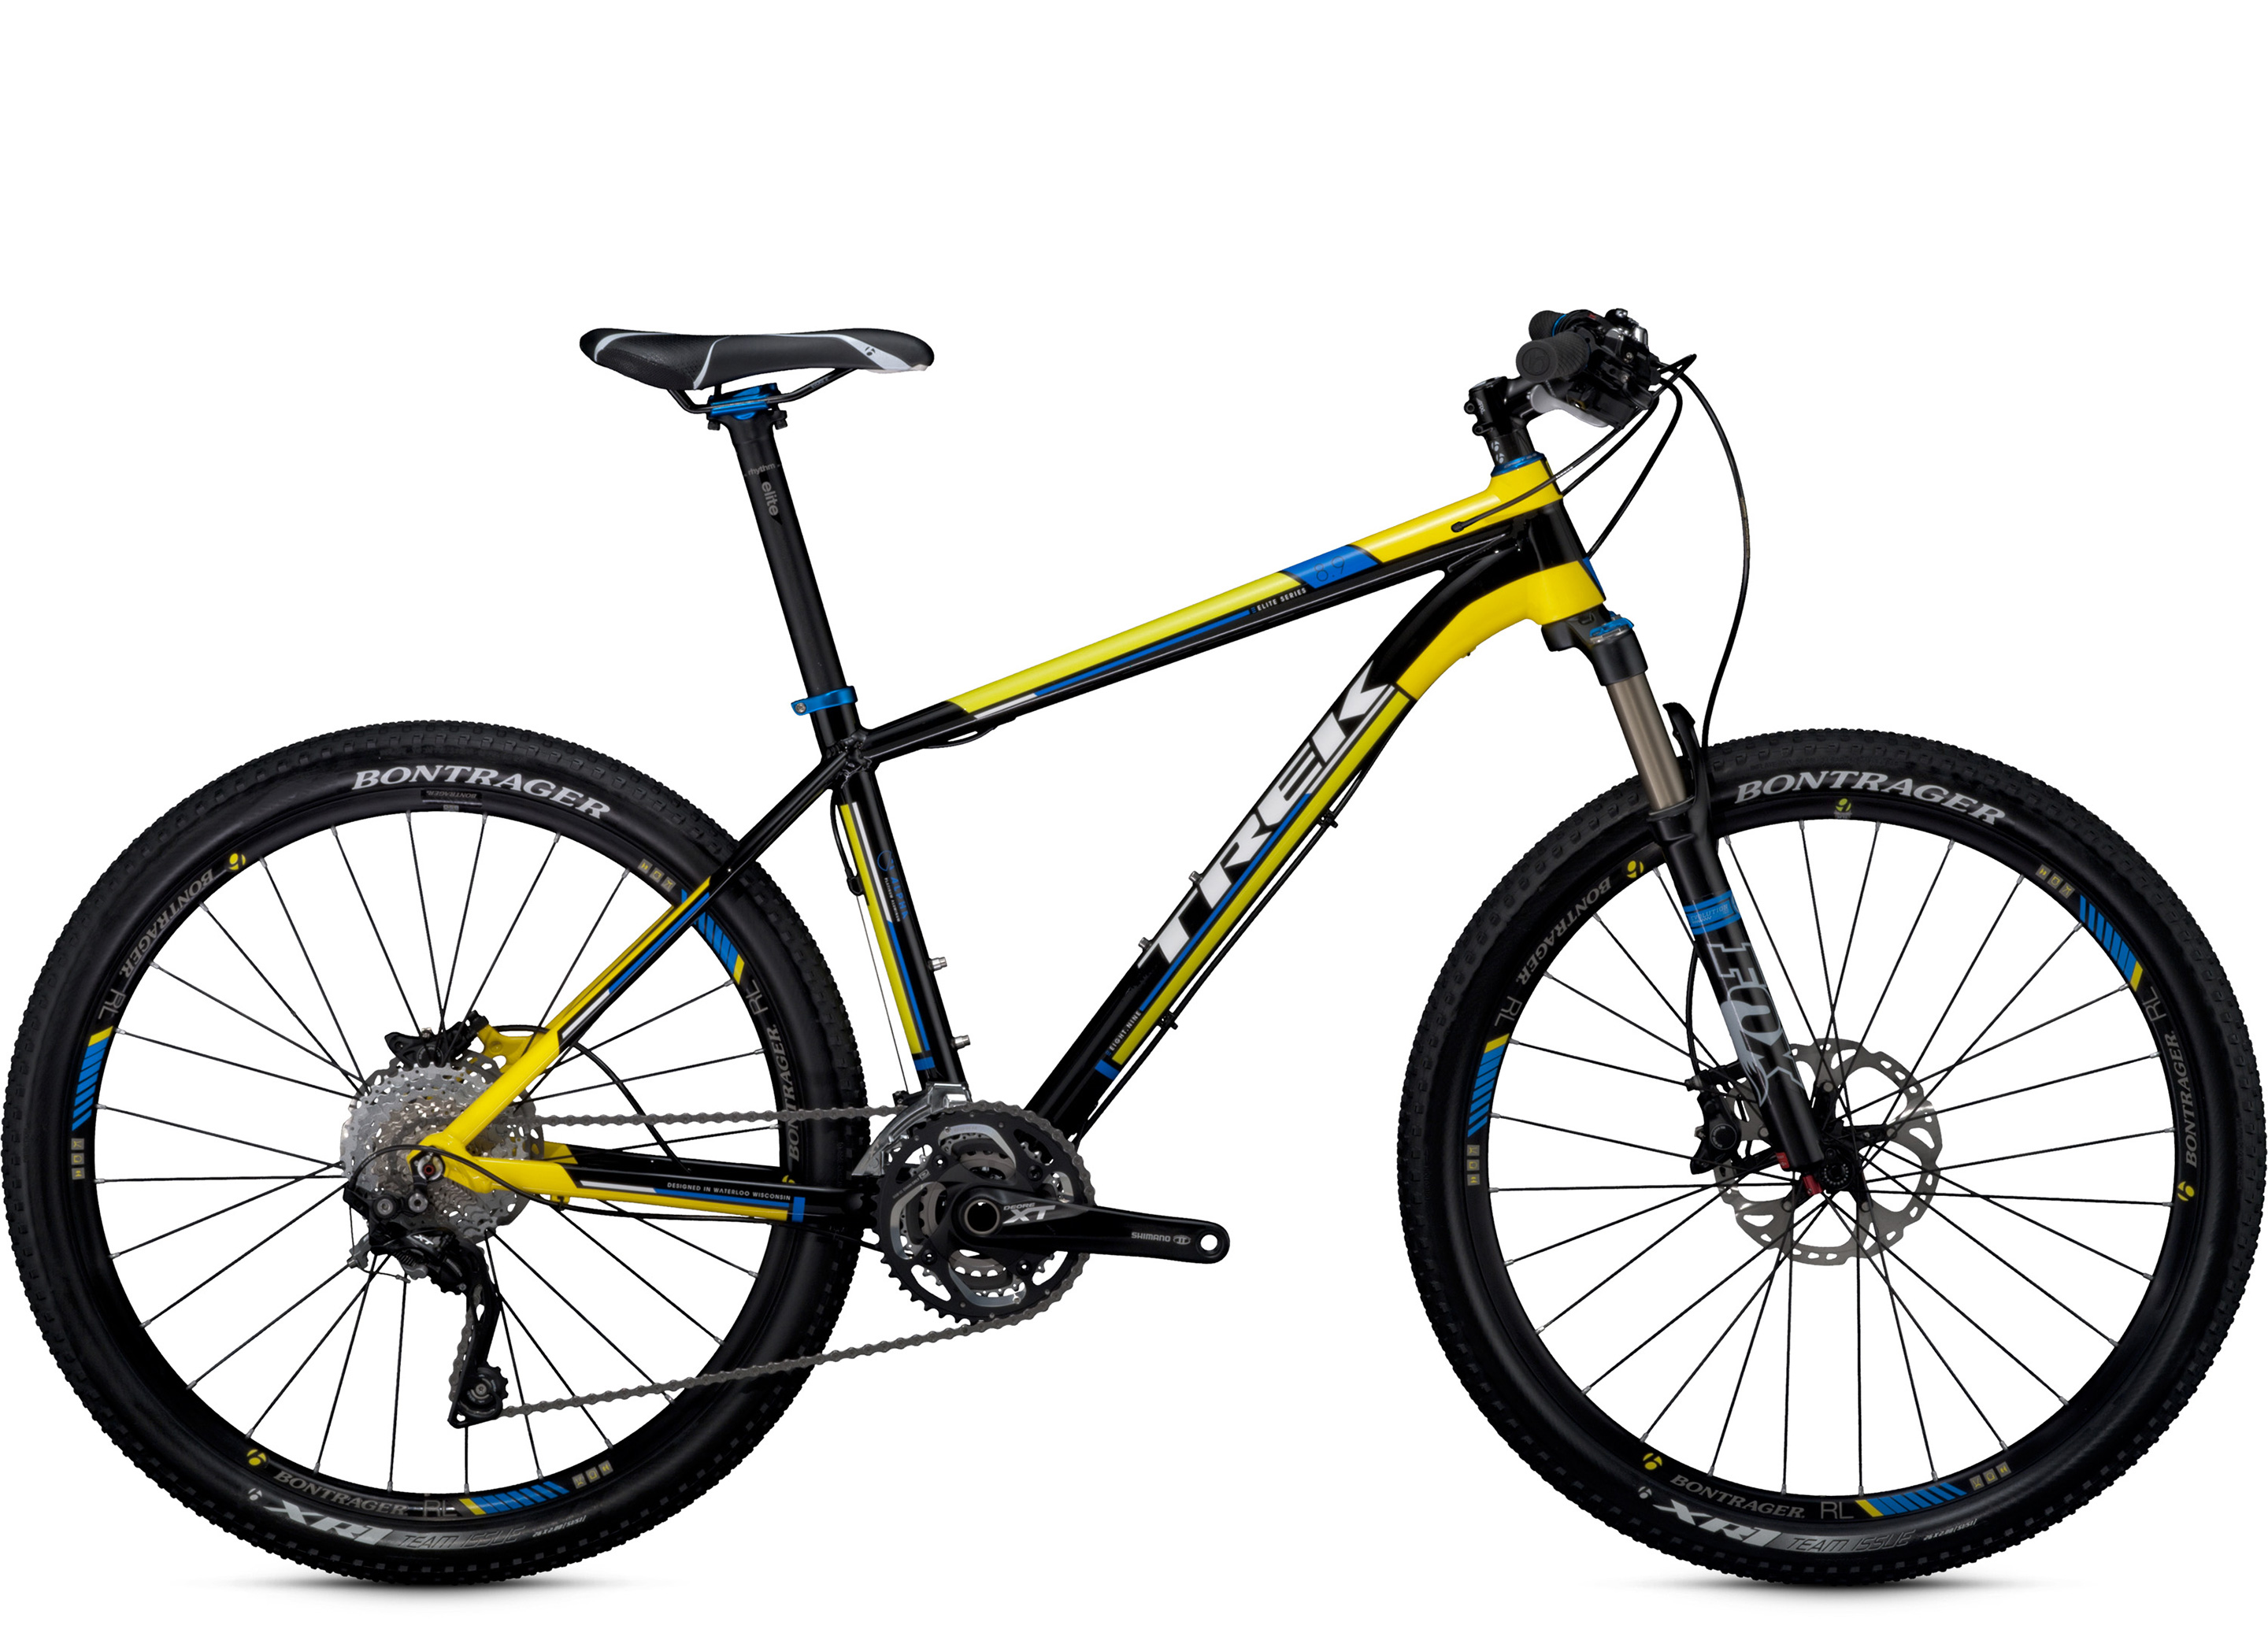 2013 Elite 8.9 | Bouticycle